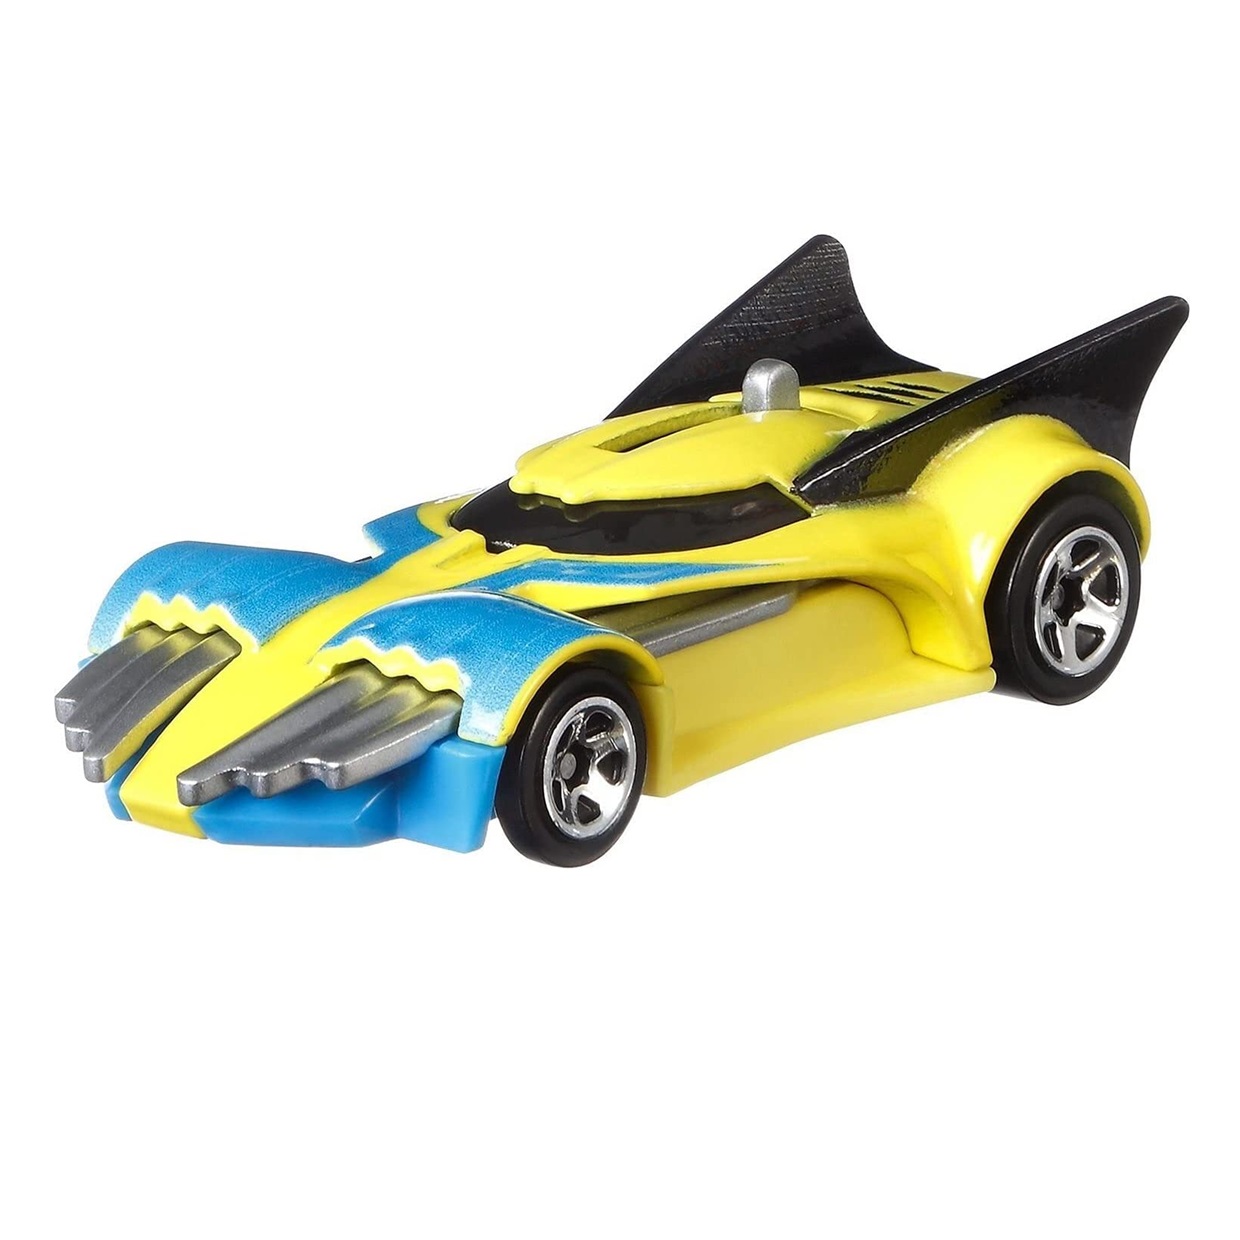 Wolverine Hot Wheels X-Men Character Cars Action Figure